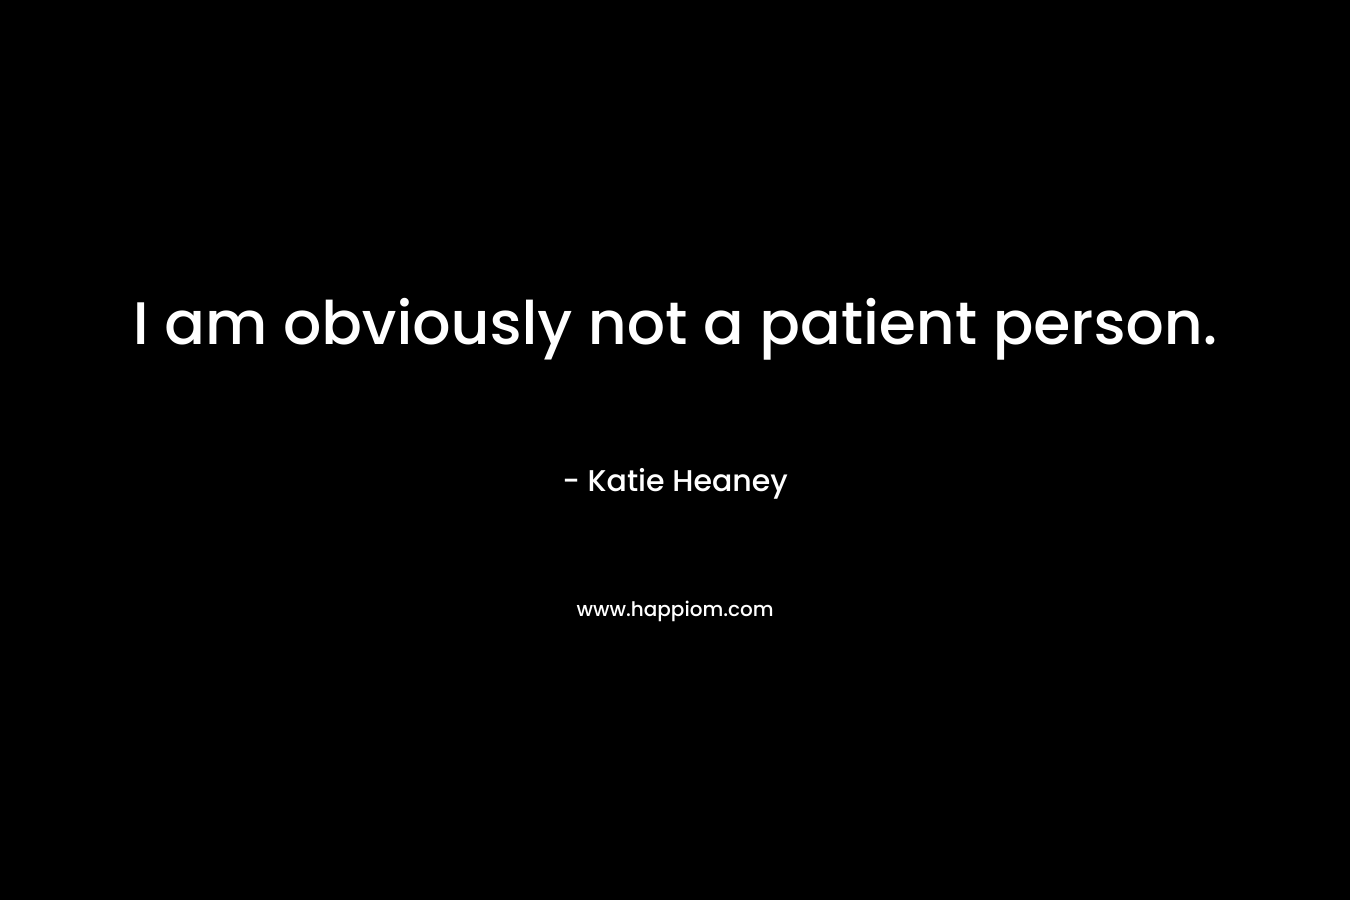 I am obviously not a patient person. – Katie Heaney